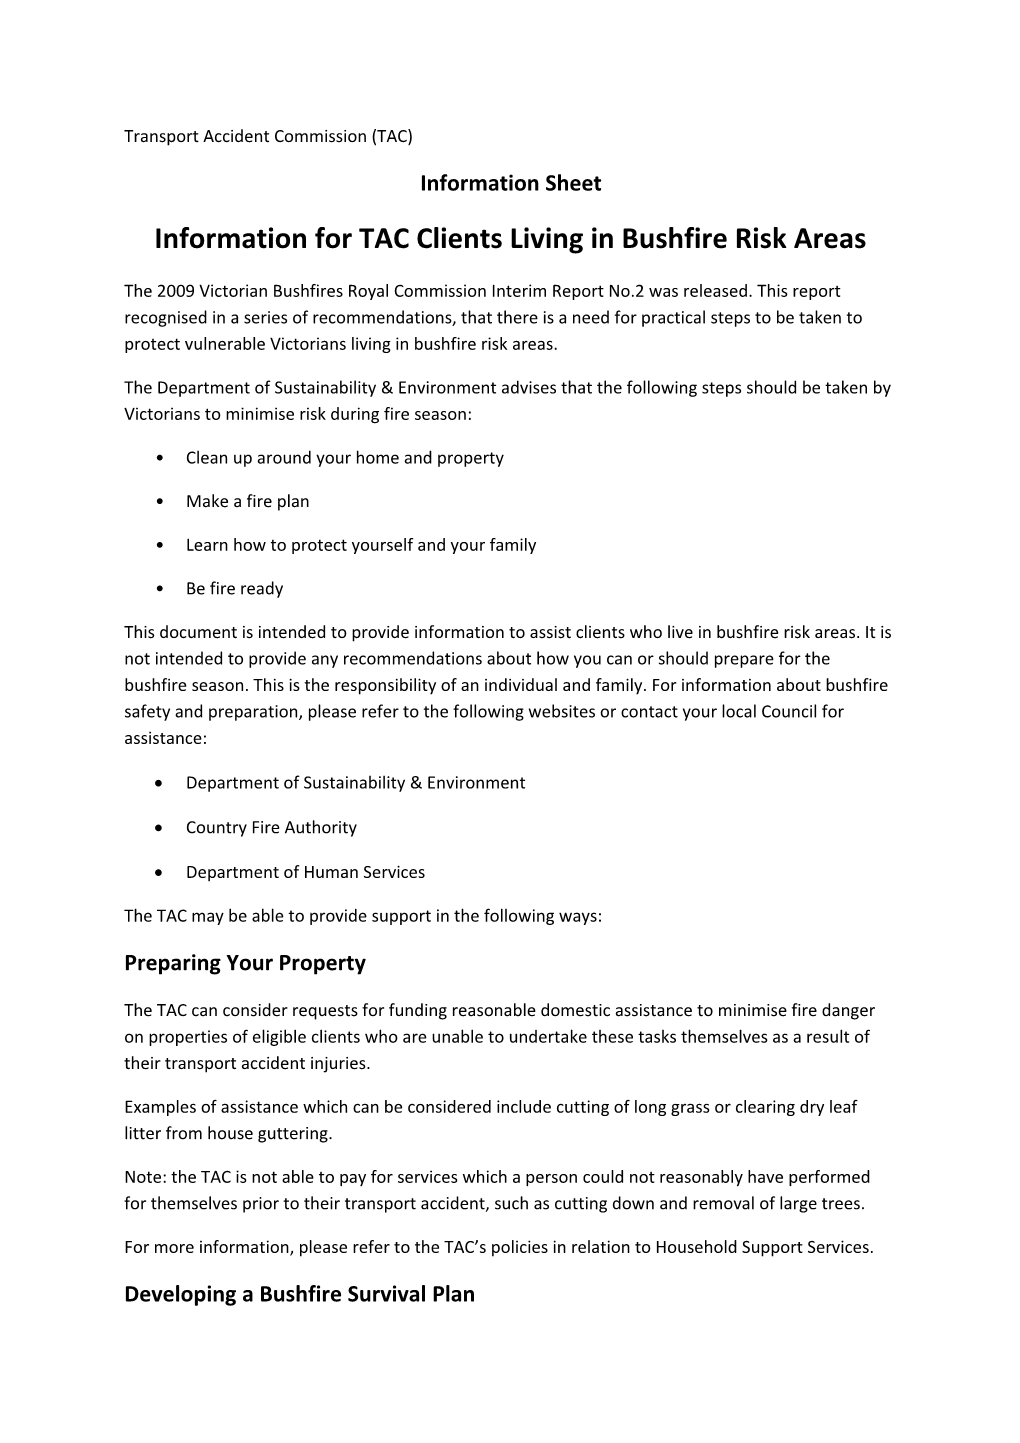 Information for TAC Clients Living in Bushfire Risk Areas